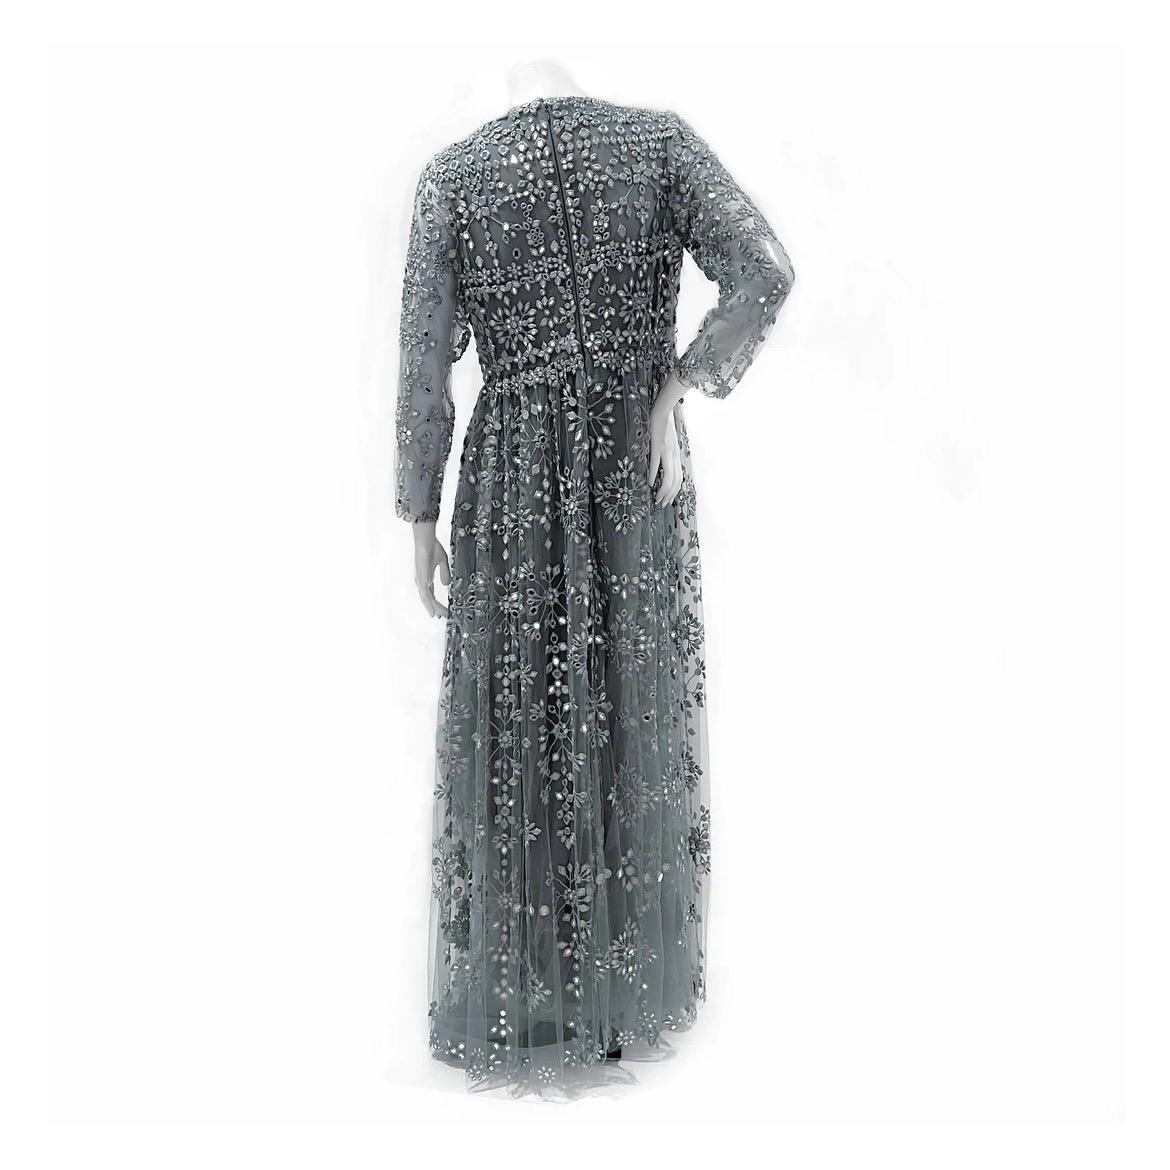 Valentino by Pier Paolo Piccioli Gown 
Made in Italy 
Blue chiffon tulle 
Silver mirror embellishment 
Mirror embellishment is in a geometric pattern 
Sheer tulle net long sleeves 
Floor length 
Full skirt 
Ballgown silhouette style dress
Horsehair